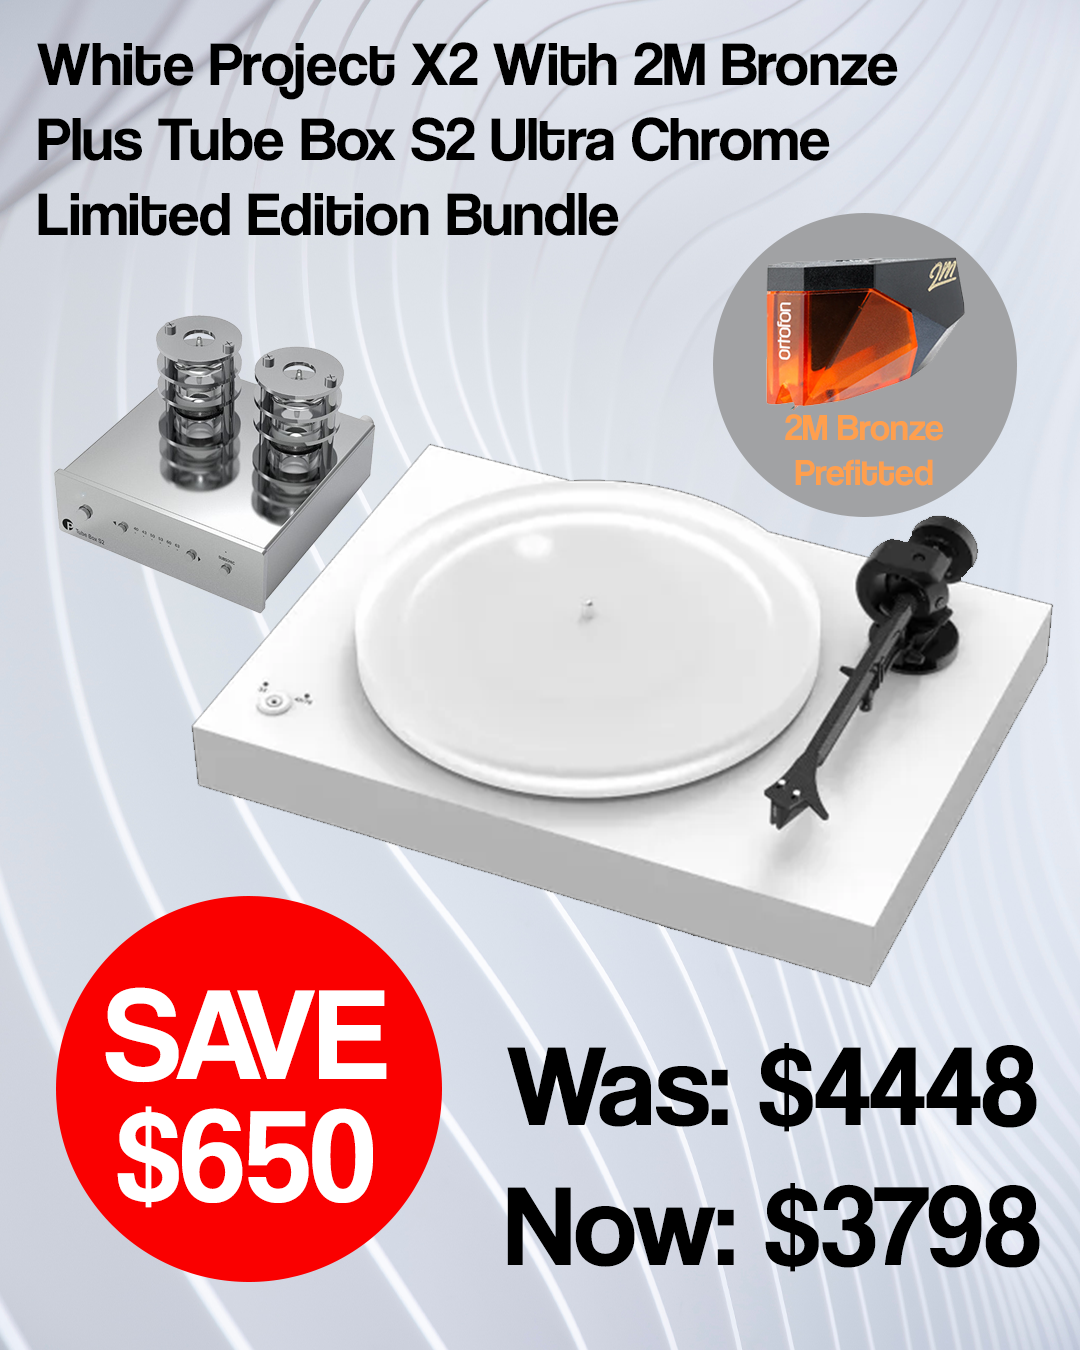 Project X2 Turntable 2m Bronze Cartridge (White) / Project Tube Box S2 Ultra Chrome Bundle Deal